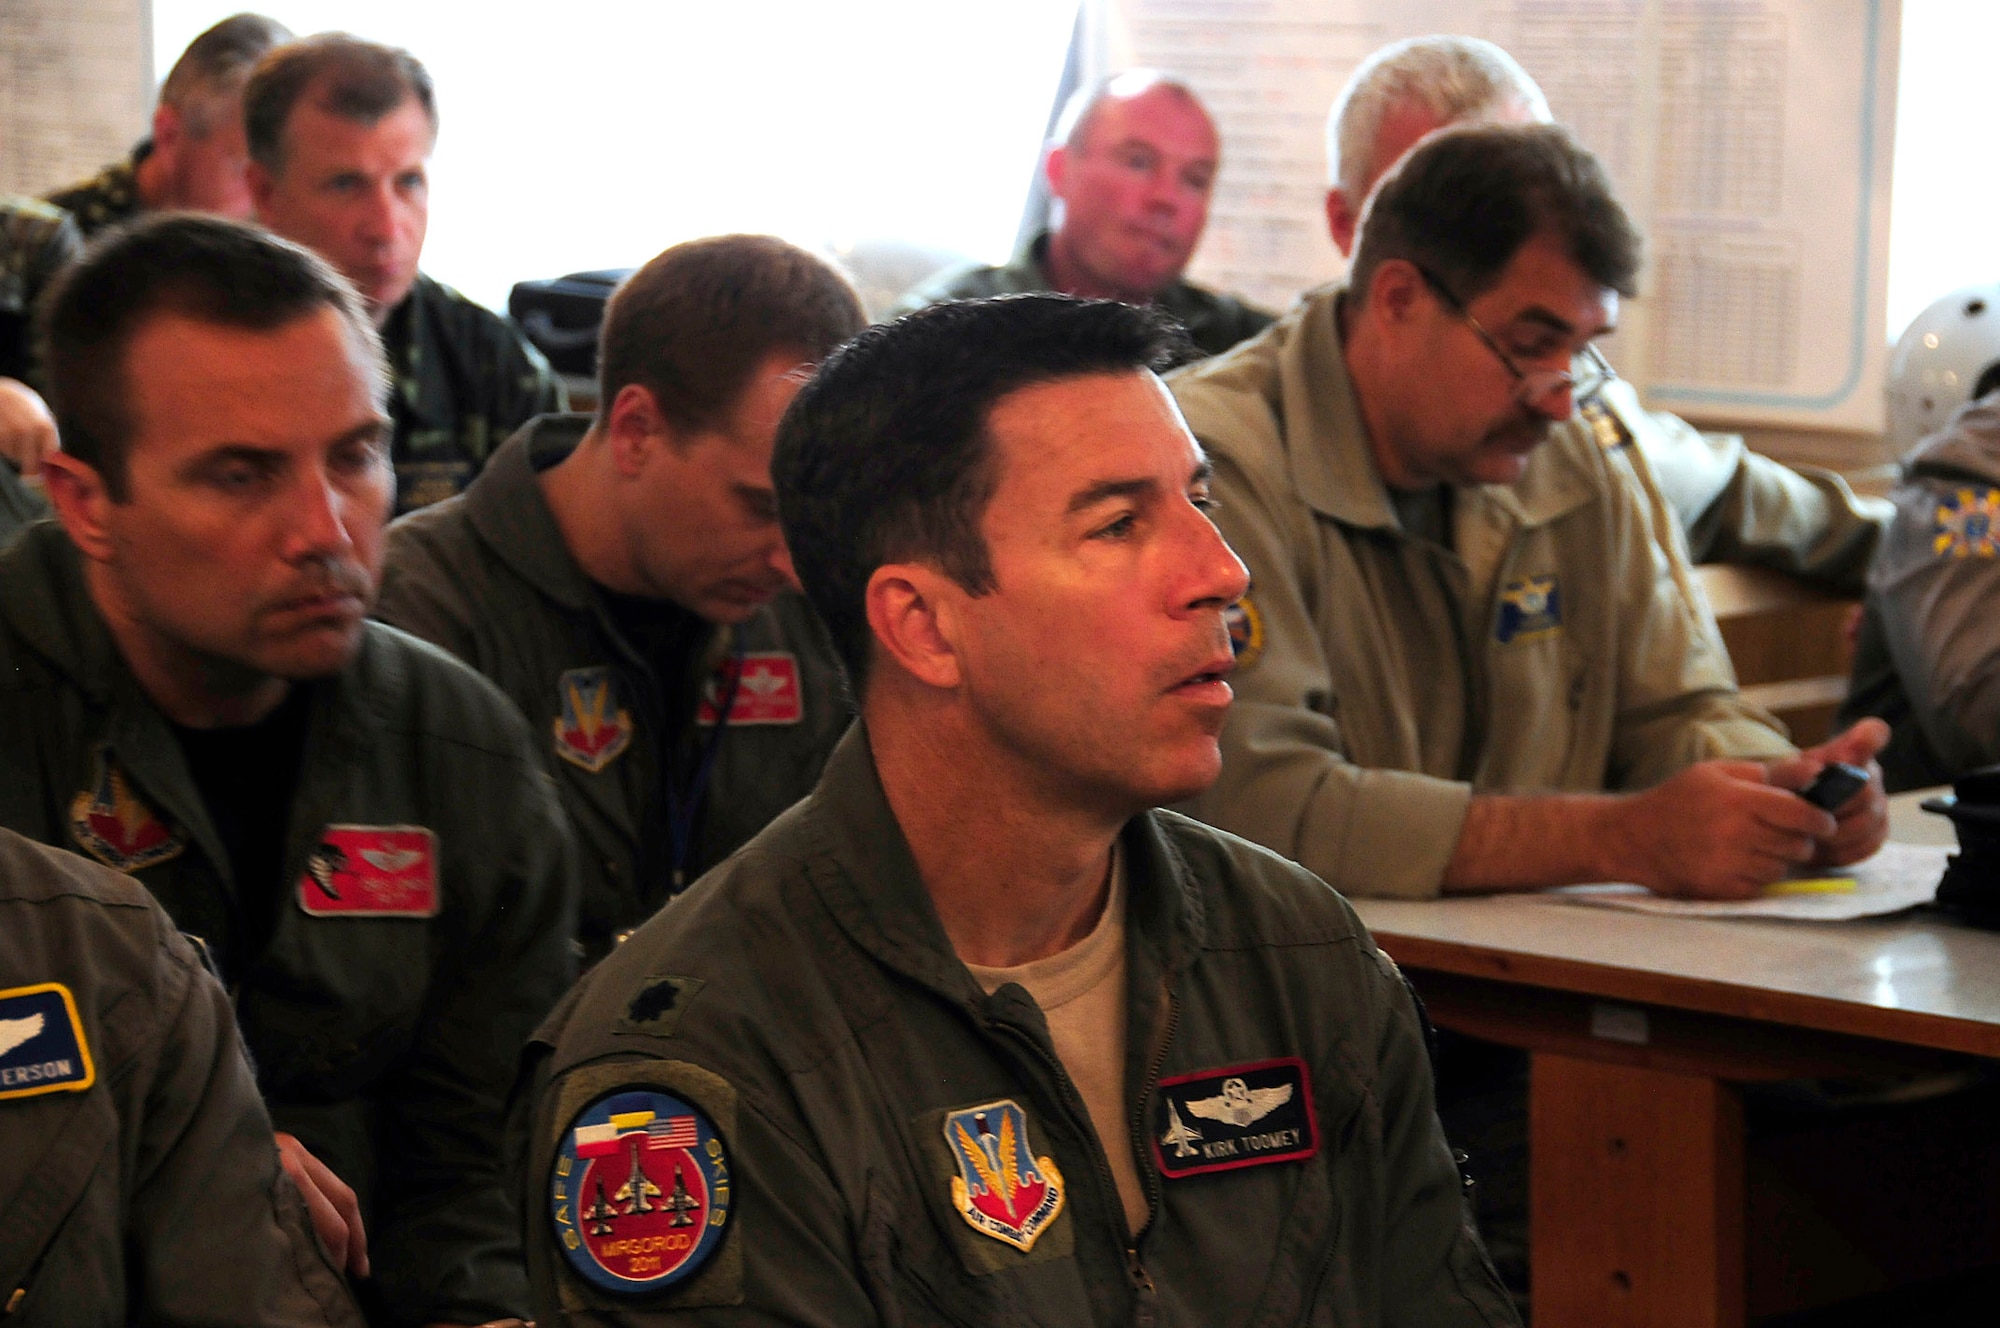 Lt. Col. Kirk Toomey of the California Air National Guard sits in a planning meeting before the launch of an intercept mission during SAFE SKIES 2011.  SAFE SKIES 2011 is a military-to-military exchange between airmen from the U.S., Ukraine and Poland to enhance airspace security over the Ukraine and Poland in preparation for EURO 2012, the European soccer championship games. (U. S. Air Force photo/Tech. Sgt. Charles Vaughn)